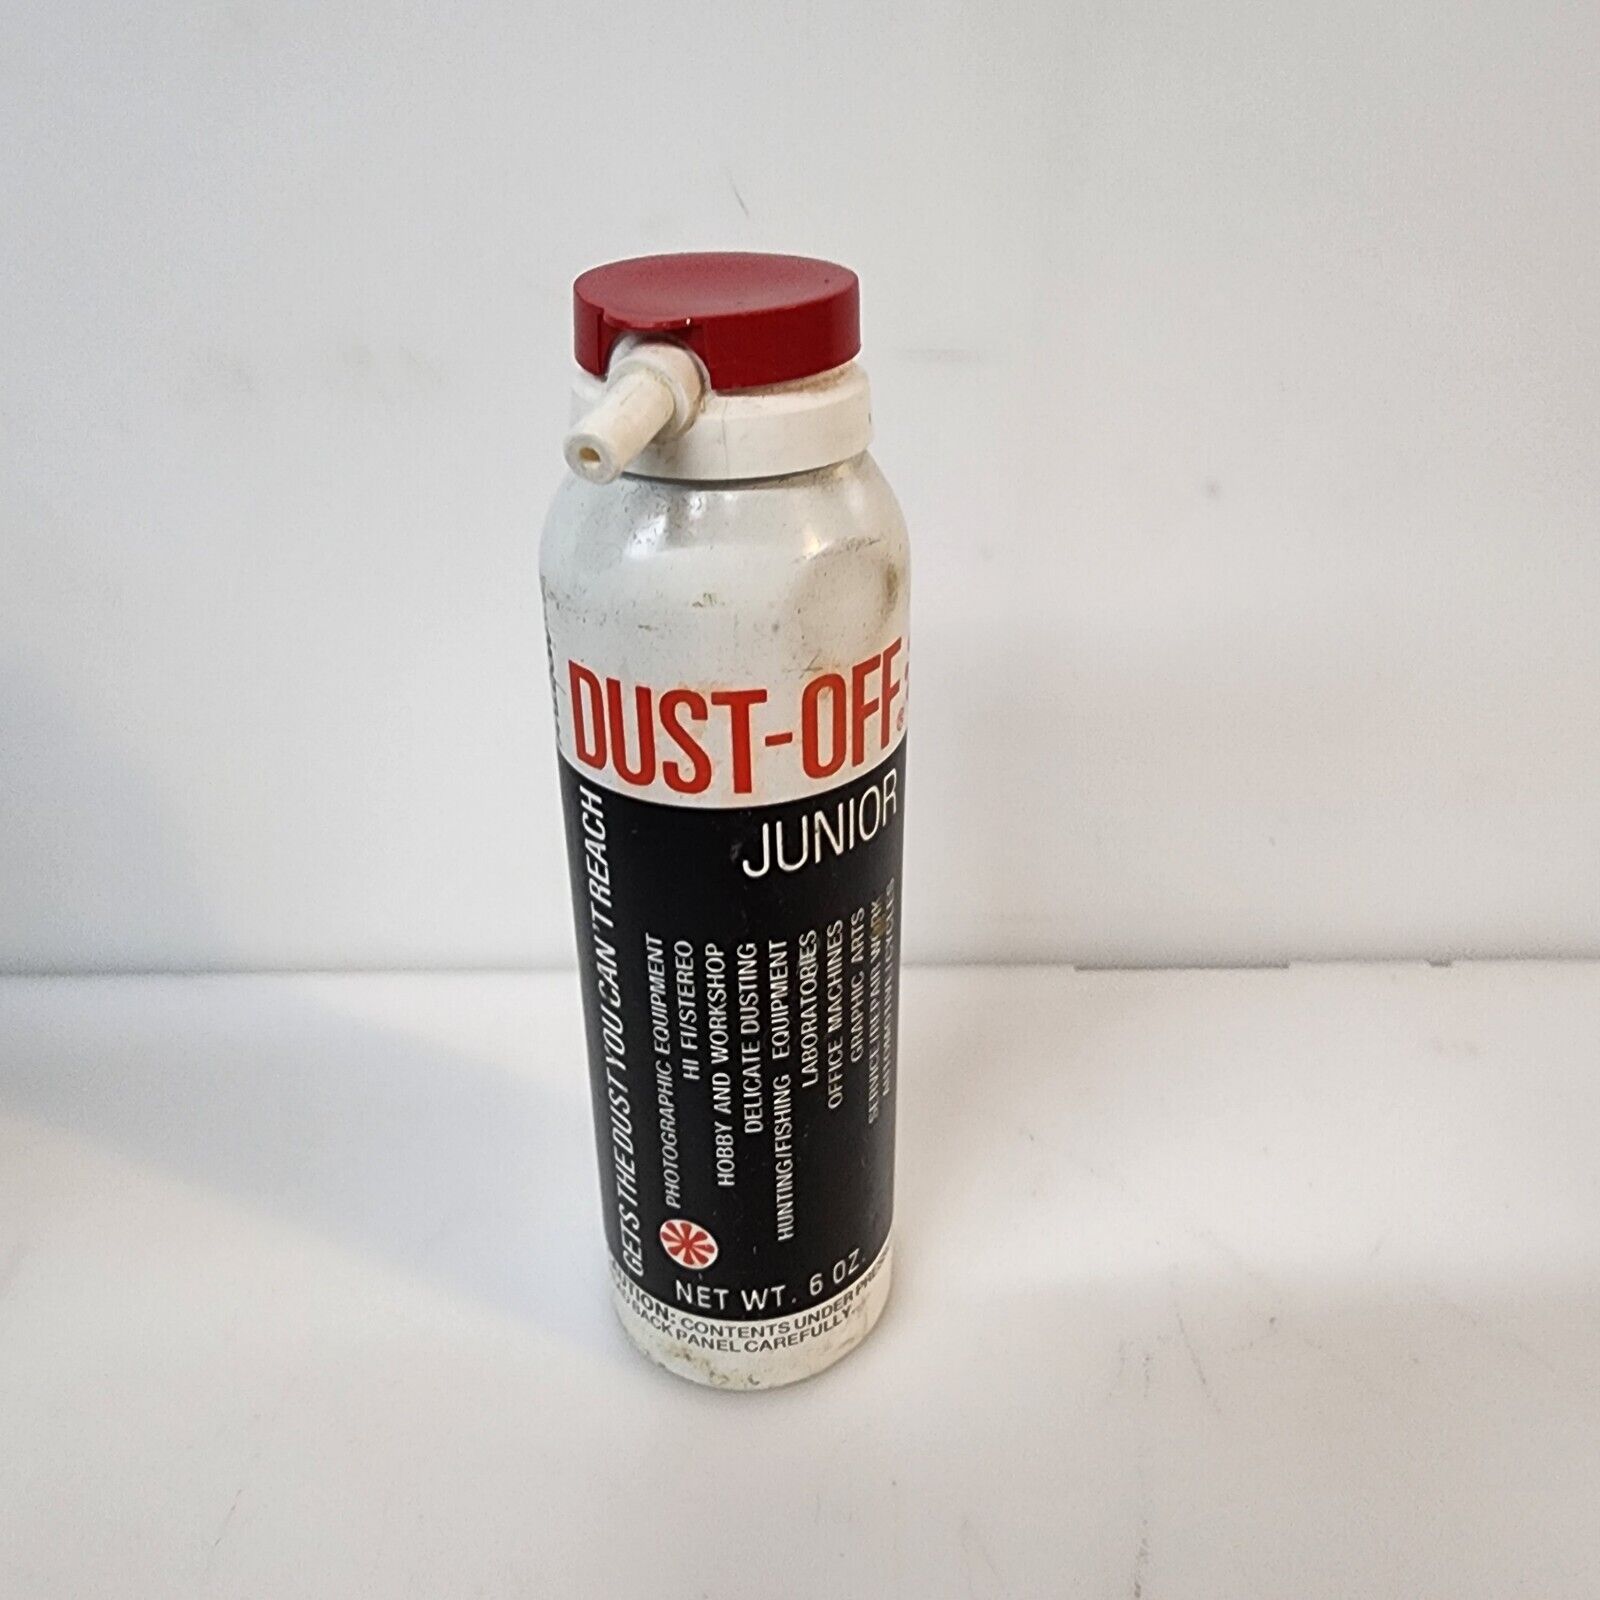 Vintage Falcon Dust-off Junior Tin 6 Oz Get The Dust You Can't Reach Advertise